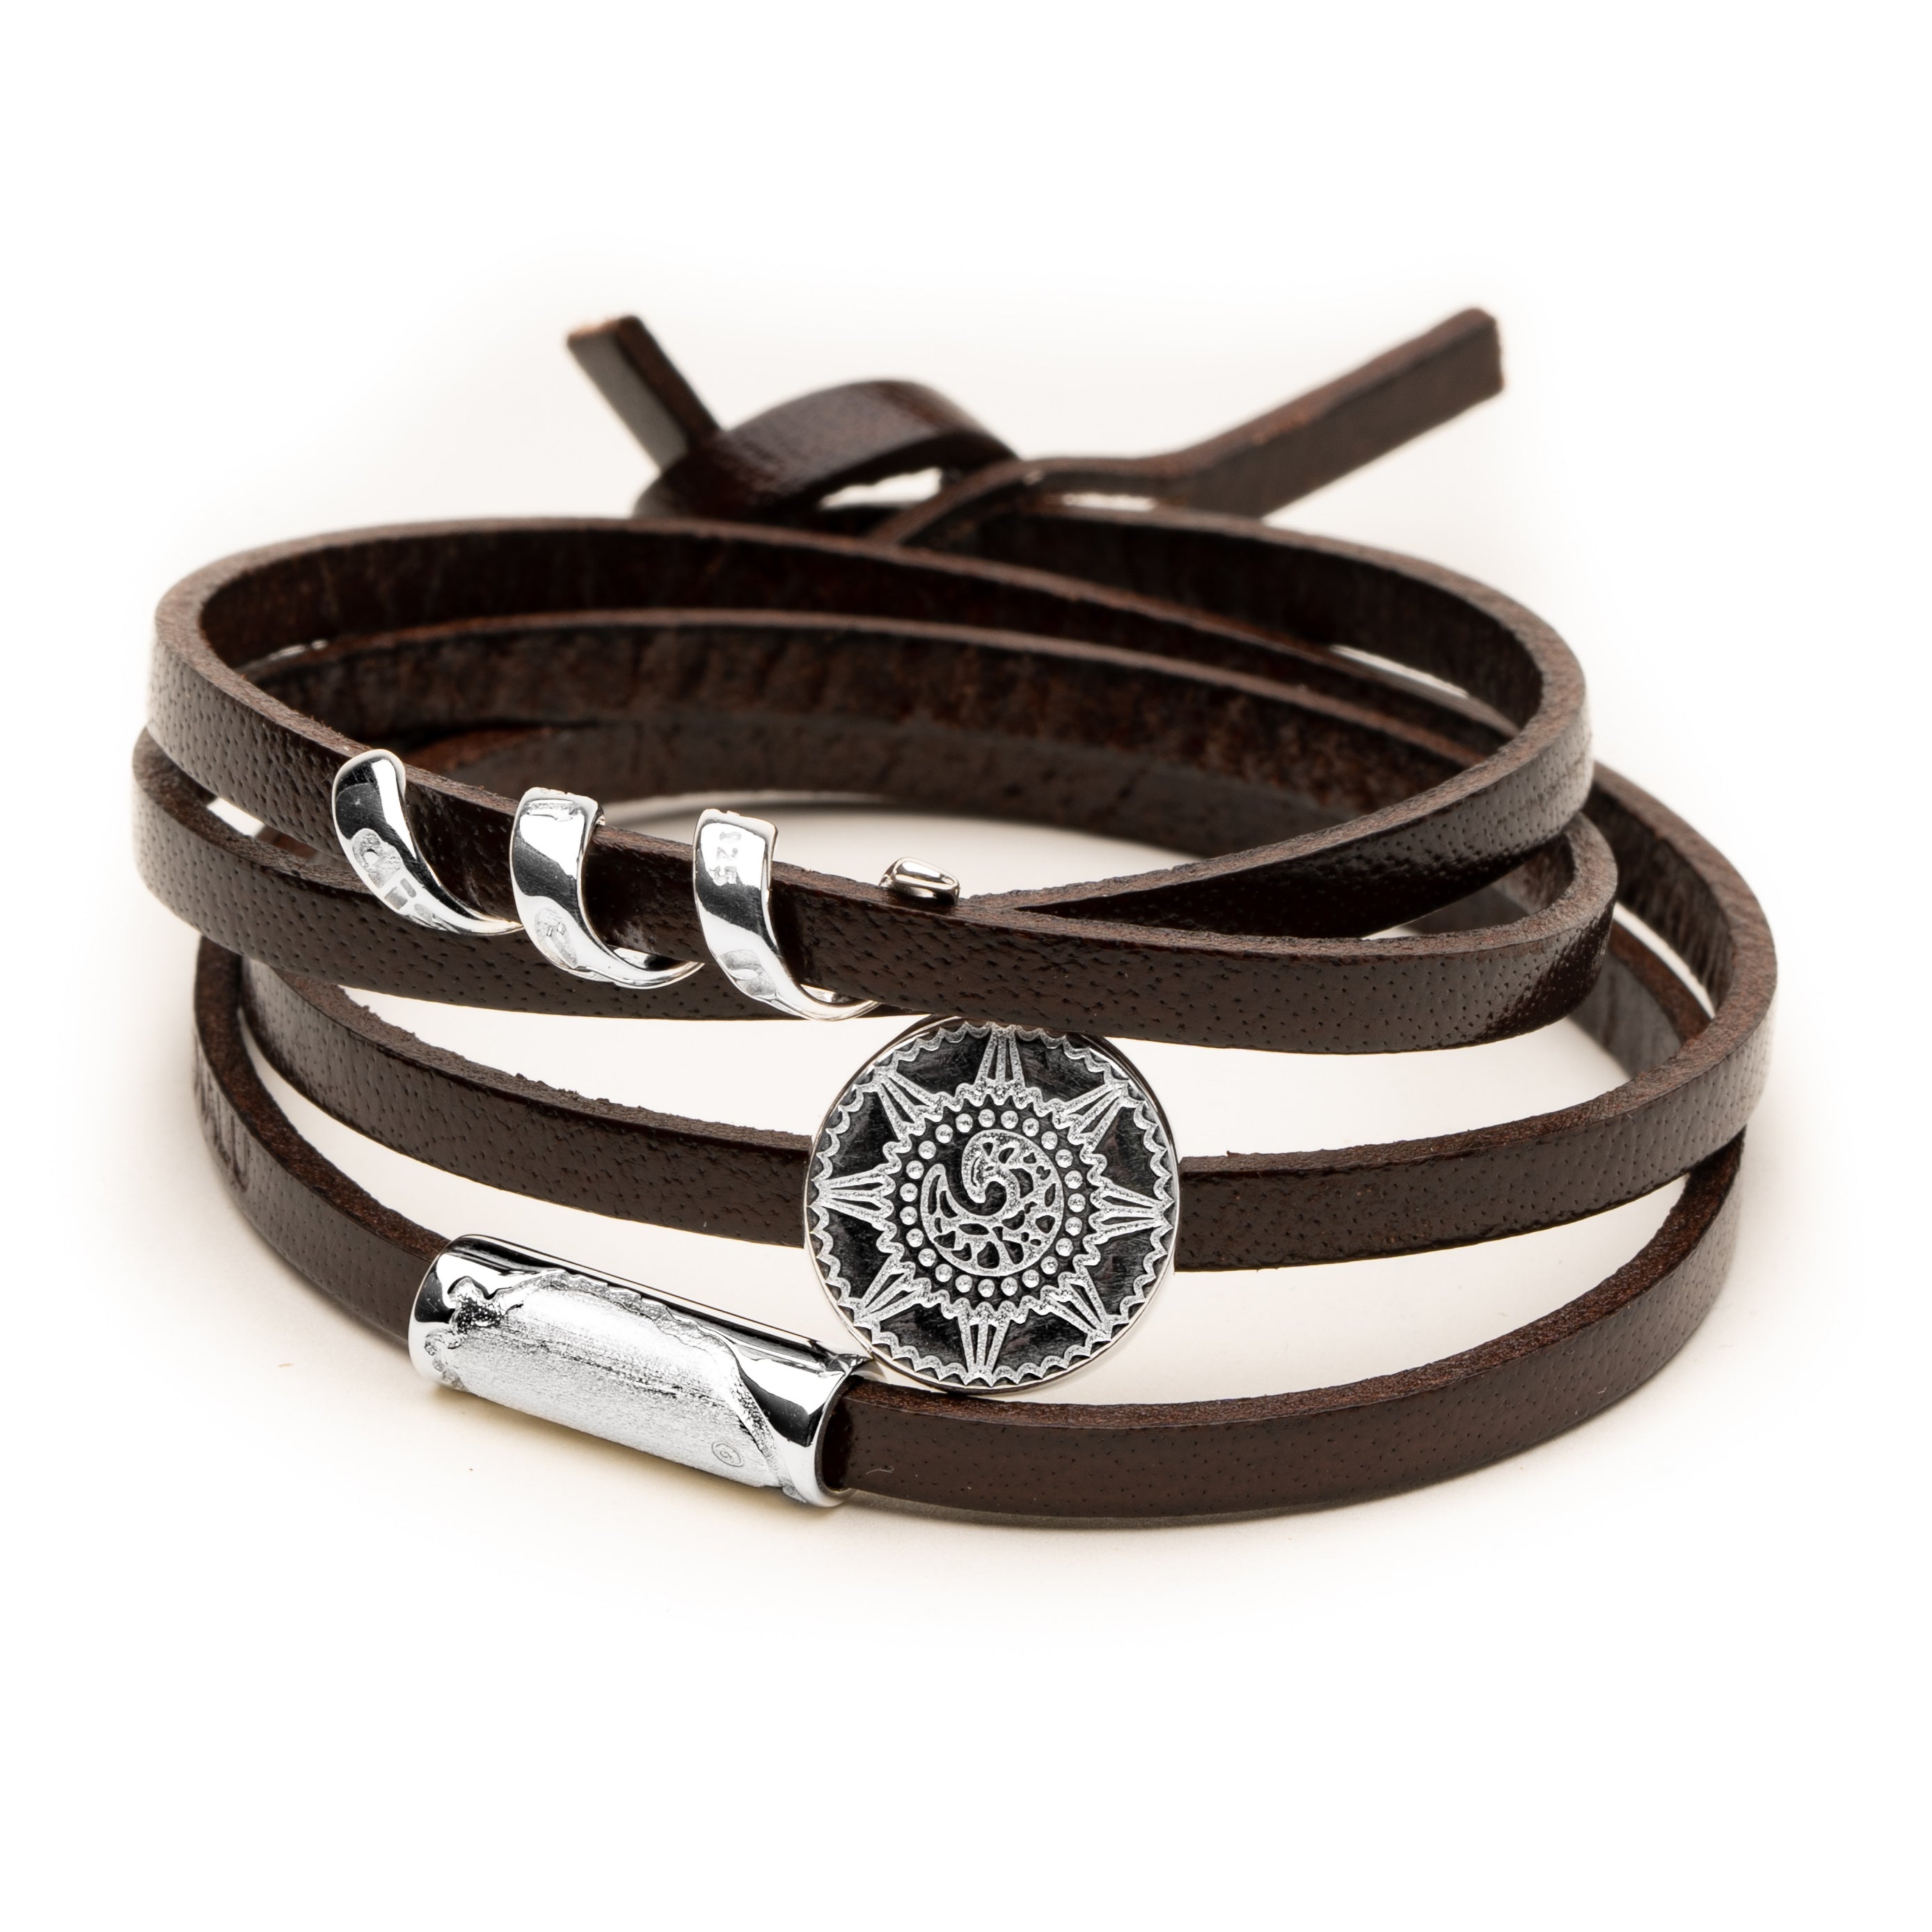 Brown leather wrap bracelet with silver charm beads.